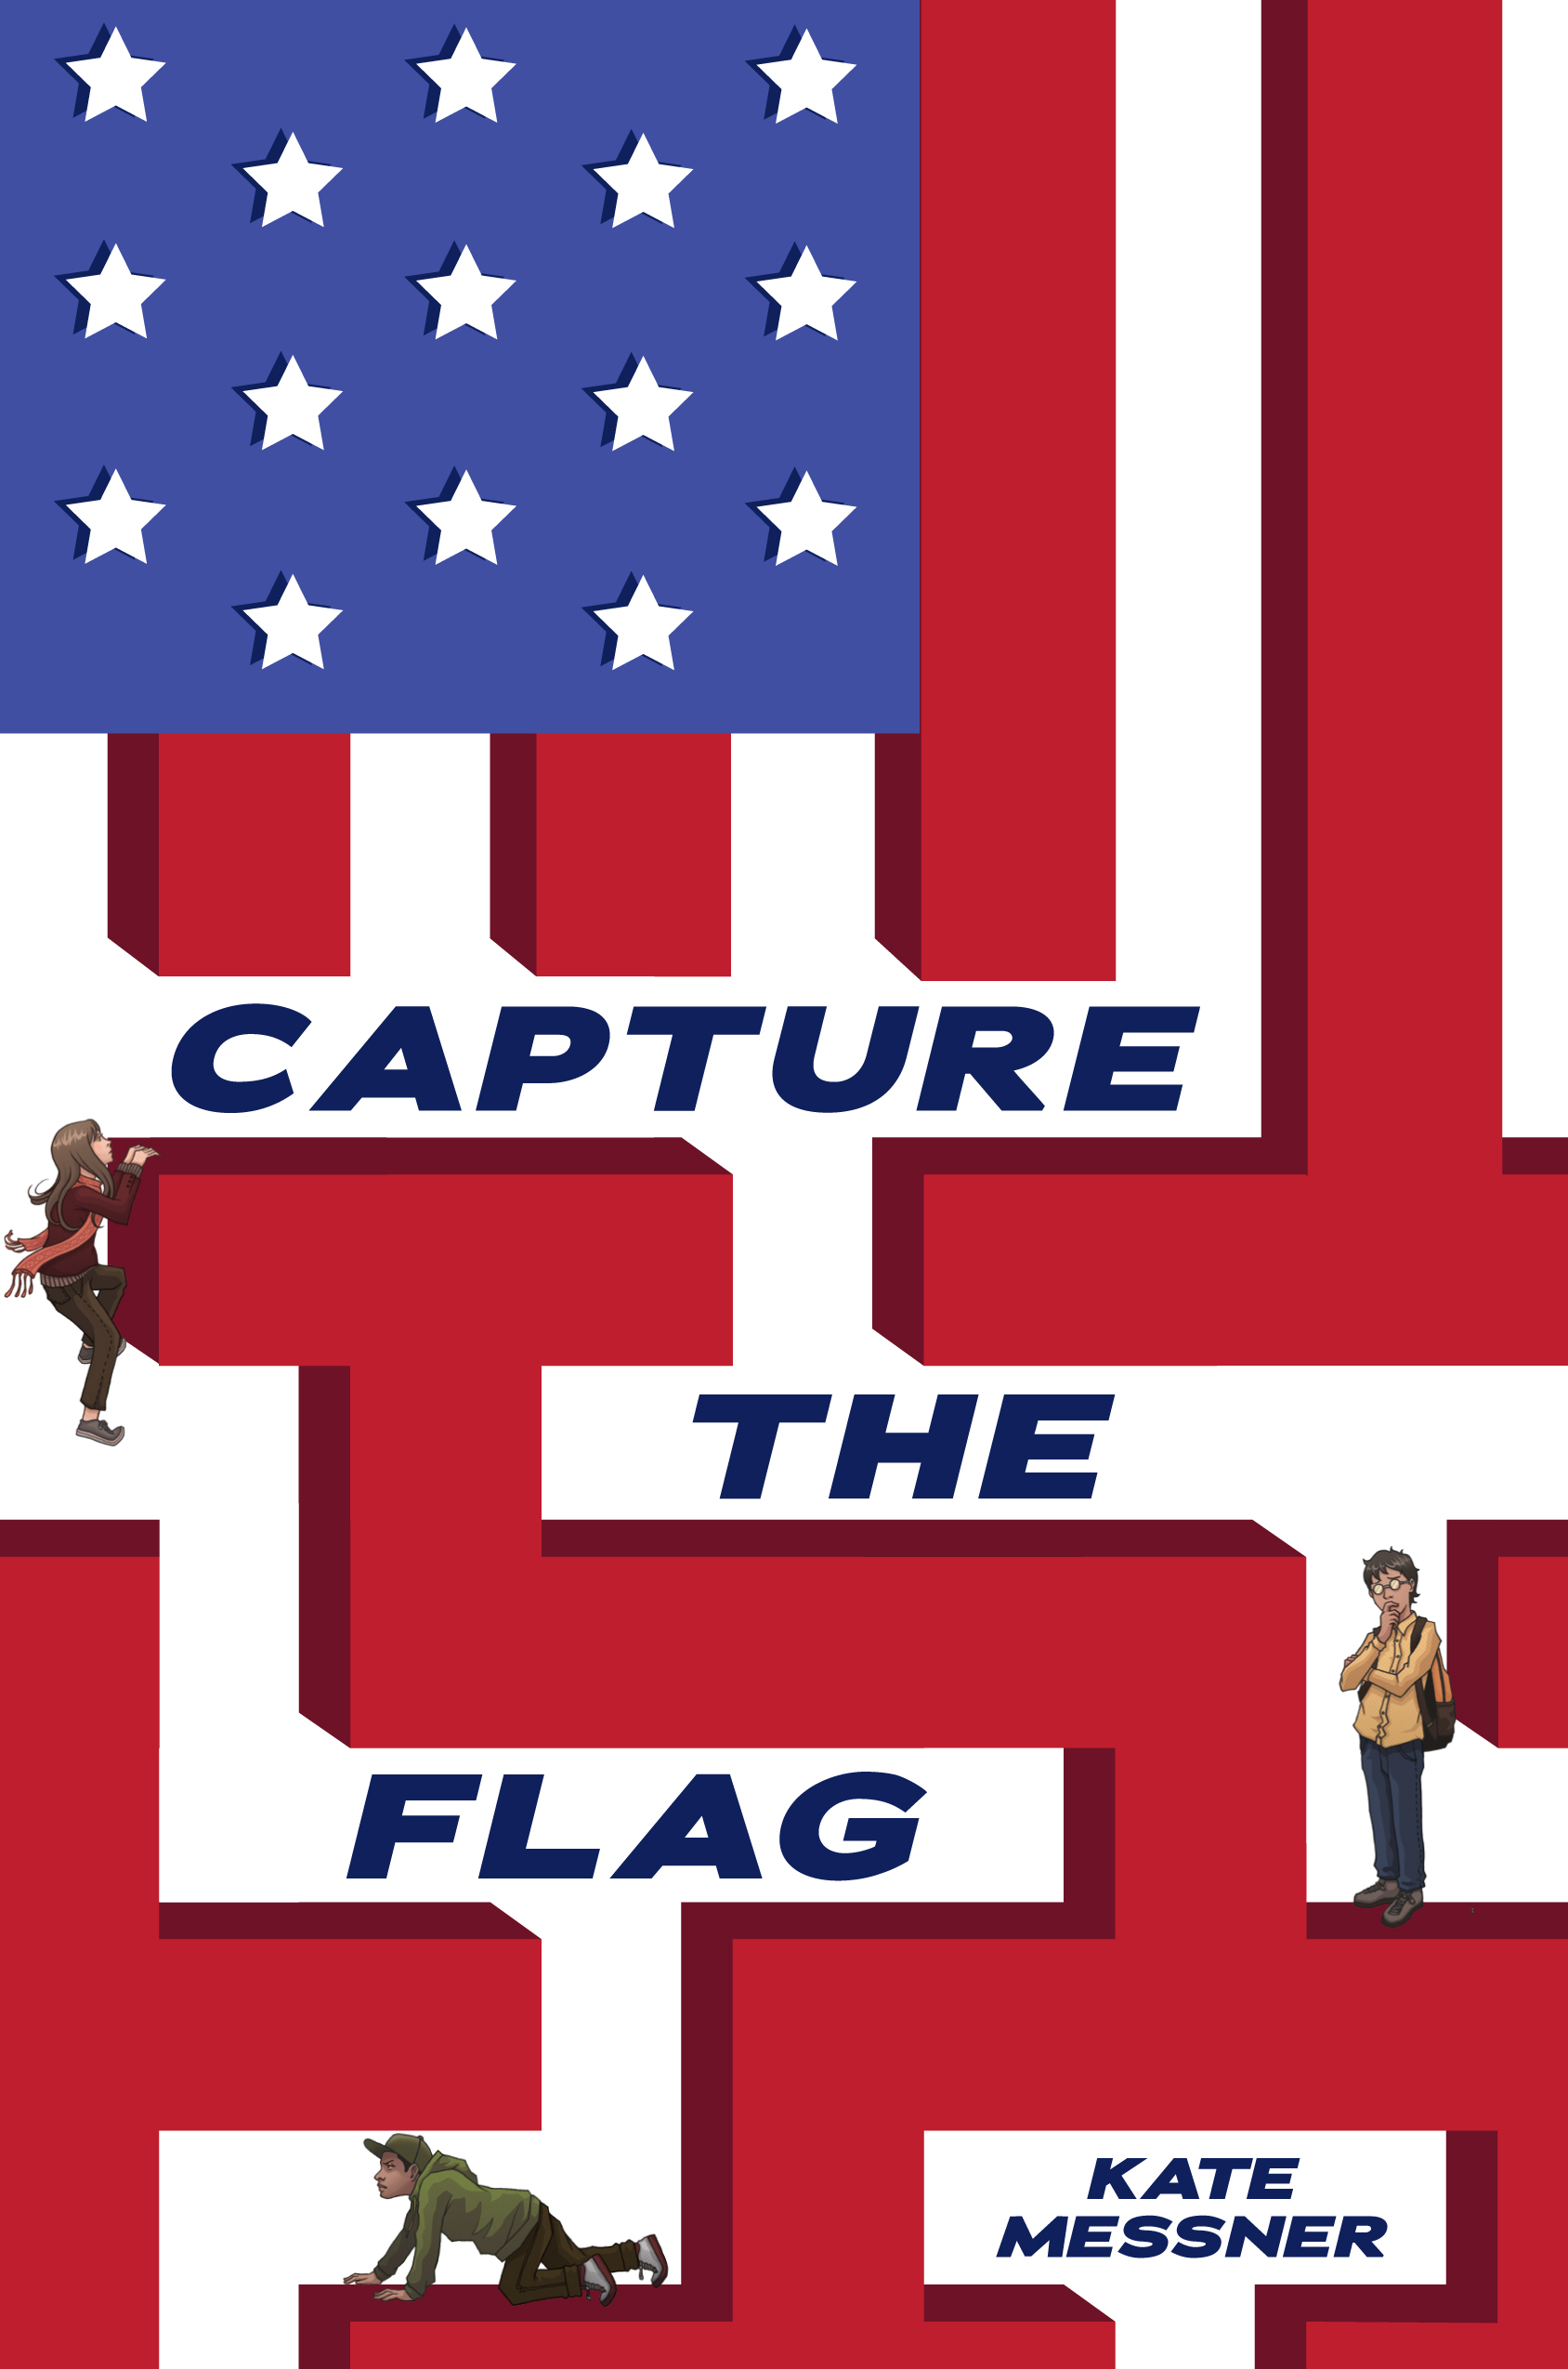 Capture The Flag Wallpapers Movie Hq Capture The Flag Pictures 4k Wallpapers 2019 - capture the flag roblox game icon